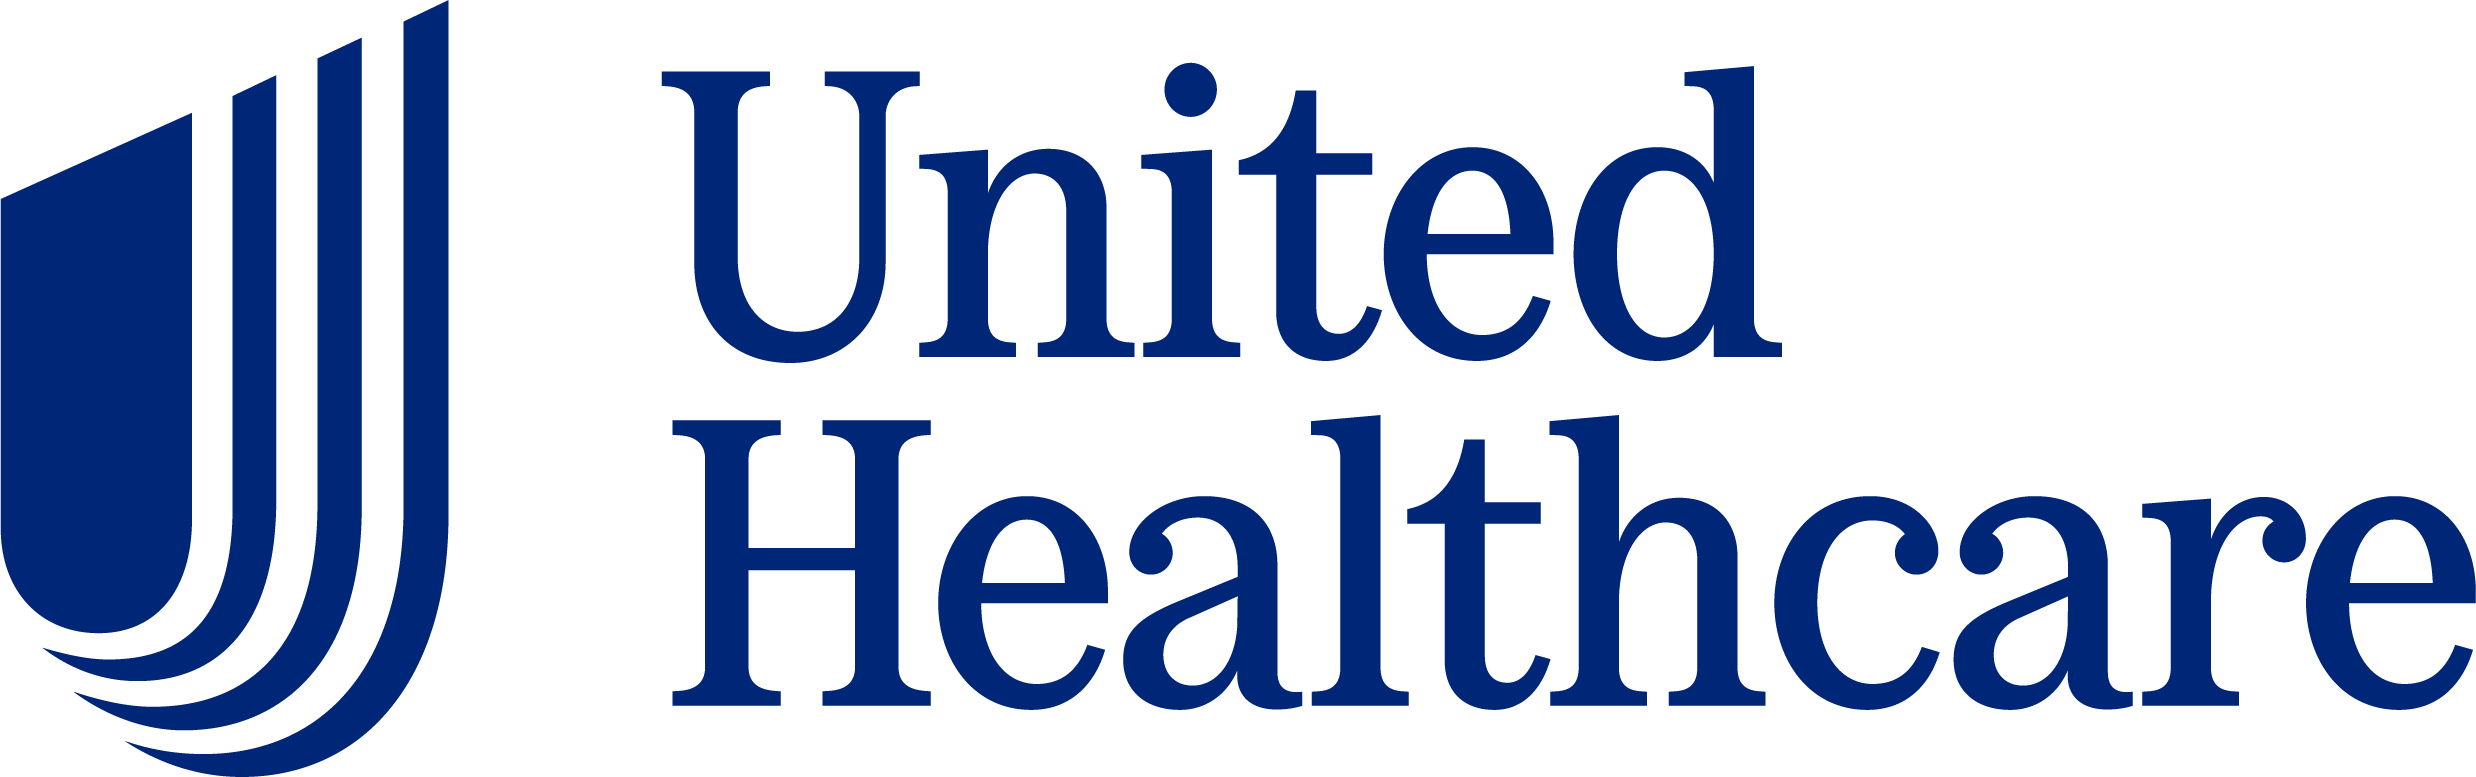 Eligibility and Benefits | UHCprovider.com